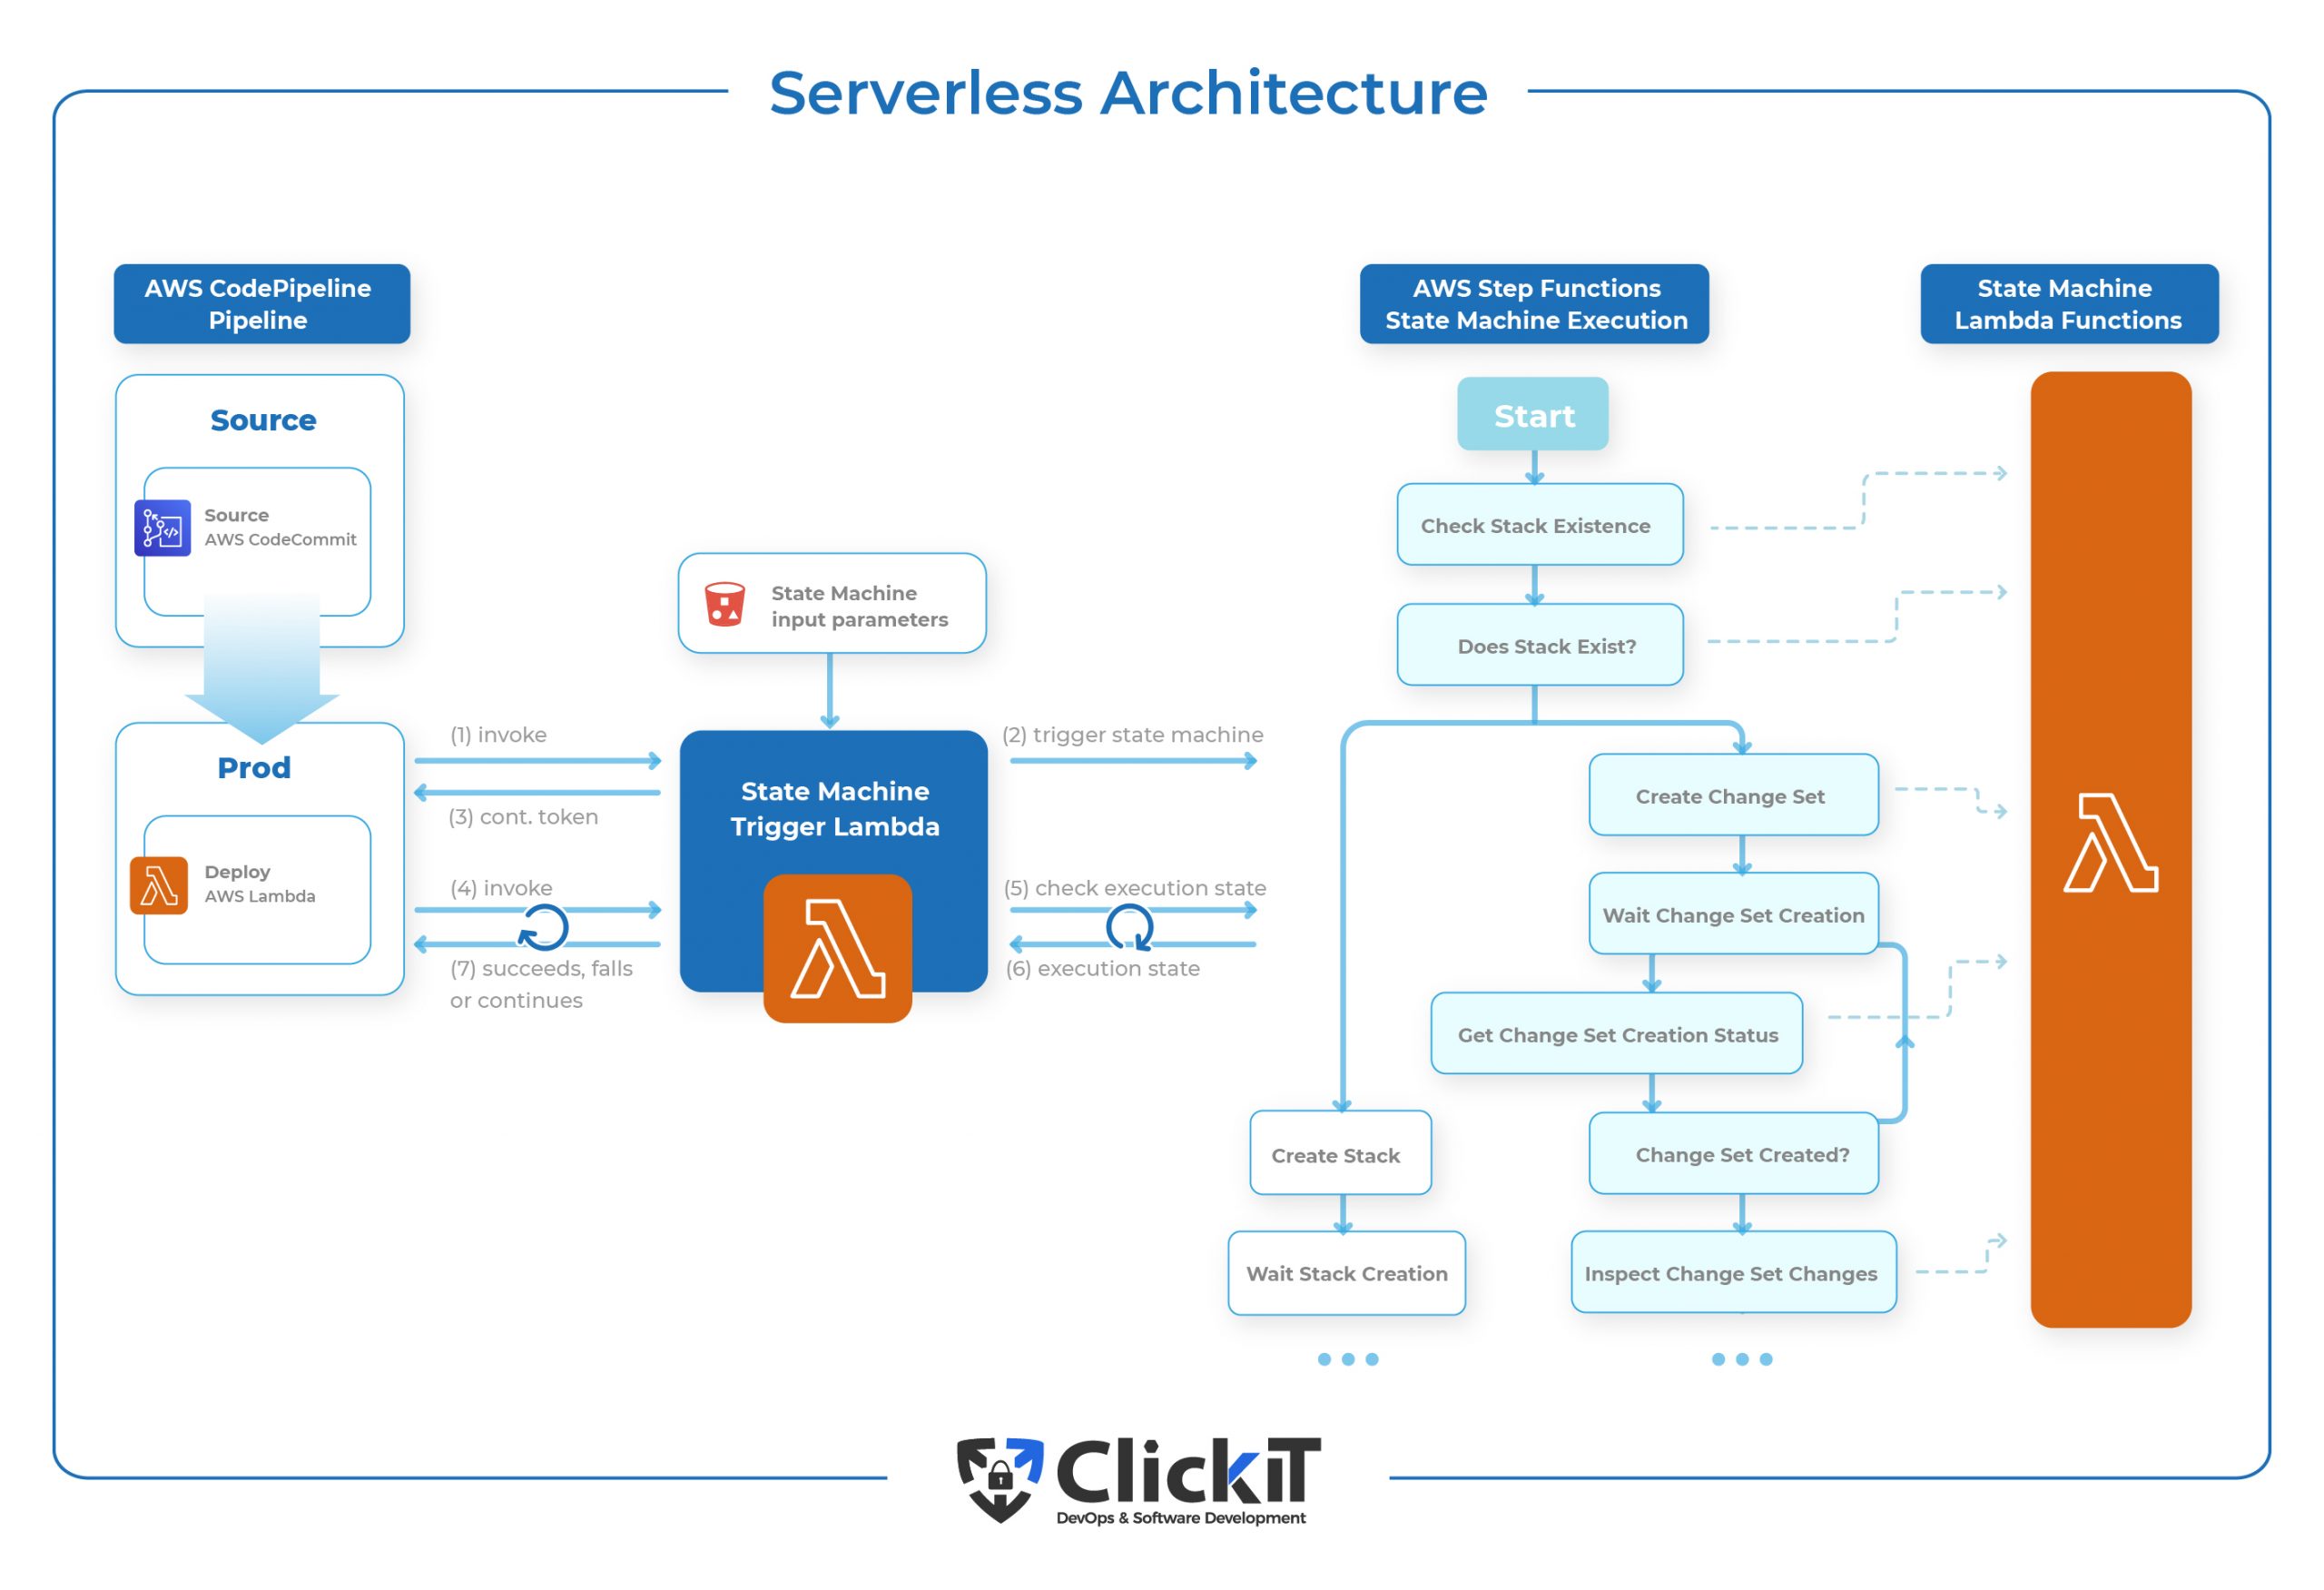 oversættelse Genoplive solo Web Application Architecture: The Latest Guide 2022